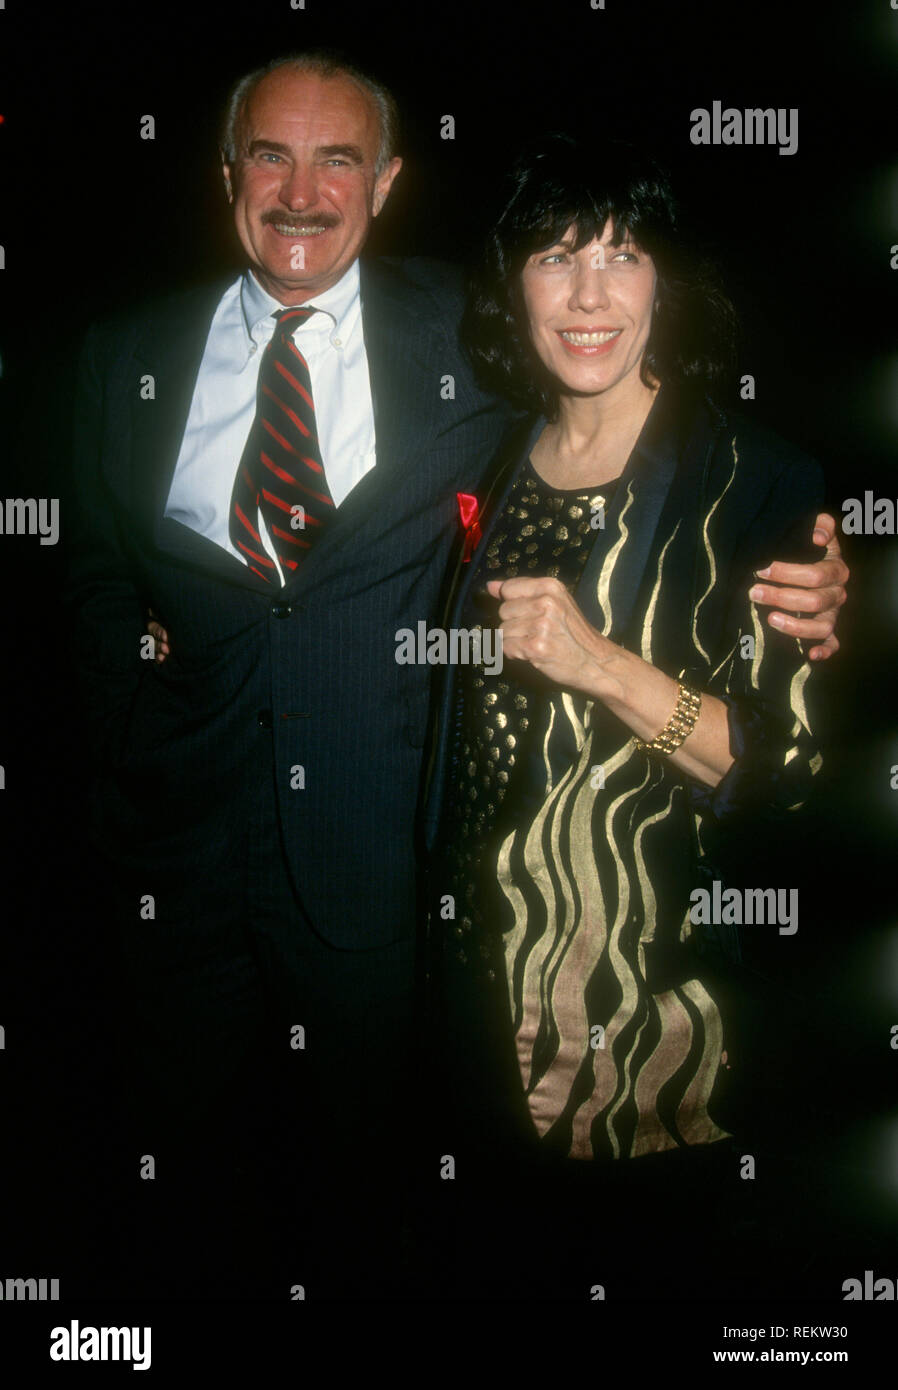 Hollywood Ca October 11 Actor Dabney Coleman And Actress Comedian Lily Tomlin Attend Warner Bros Pictures The Beverly Hillbillies Premiere On October 11 1993 At Mann S Chinese Theatre In Hollywood California Photo